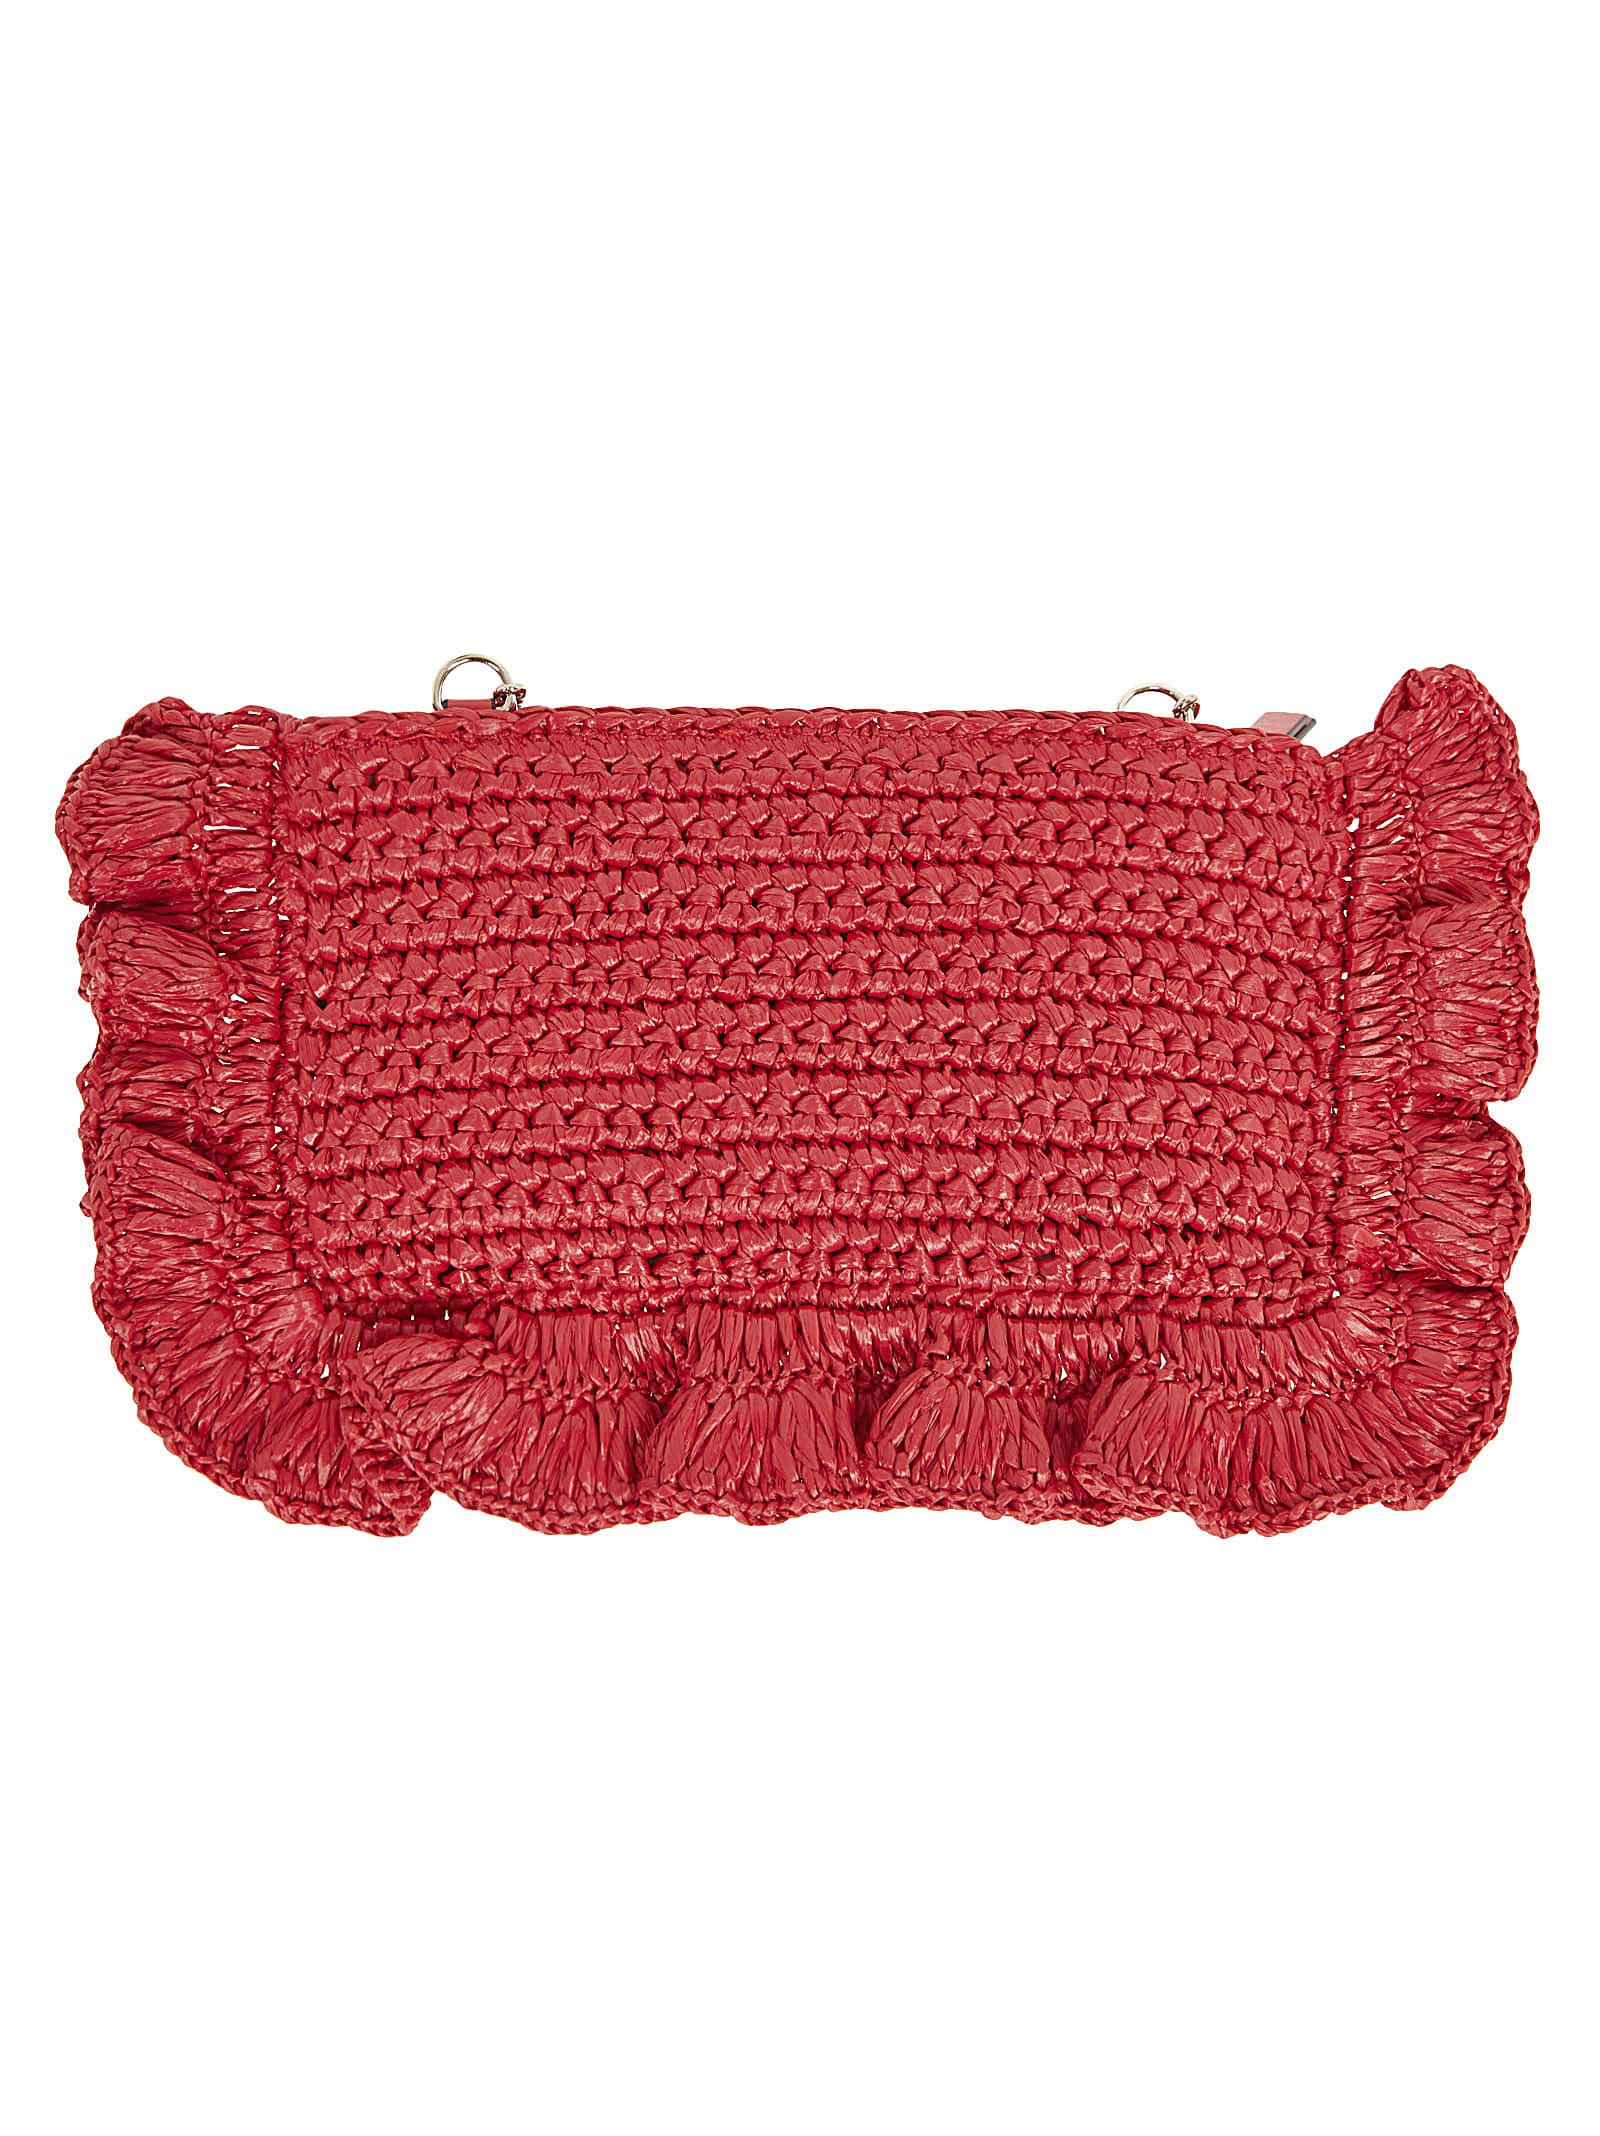 Red Valentino Rock Ruffled Shoulder Bag In Rosso